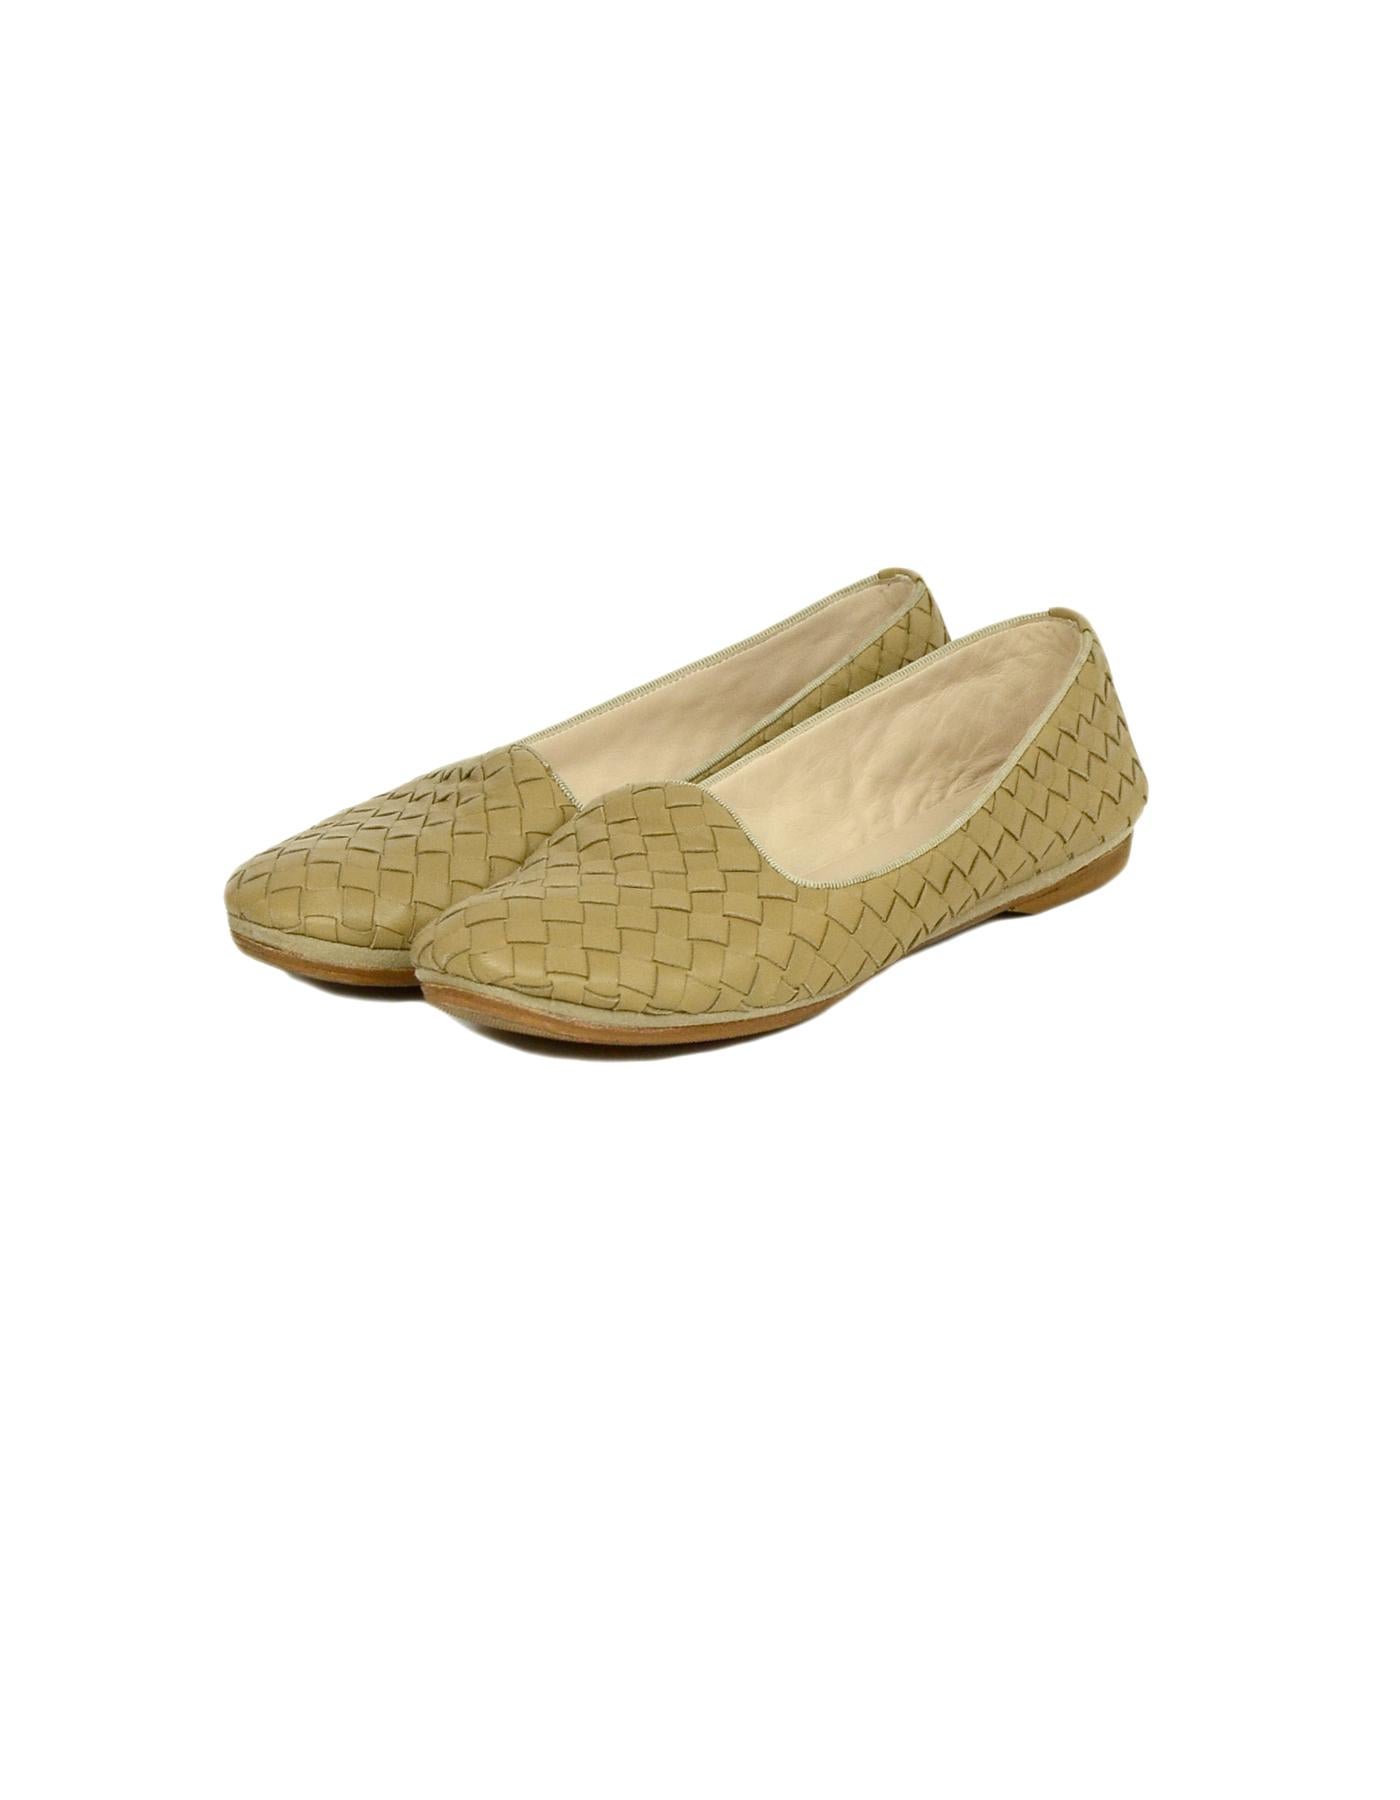 Bottega Veneta Beige Intrecciato Woven Leather Loafers sz 36.5

Made In: Italy
Color: Beige
Materials: Leather
Closure/Opening: Slip on
Overall Condition: Good pre-owned condition, scratches and marks on the insoles, and wear on soles.
Estimated